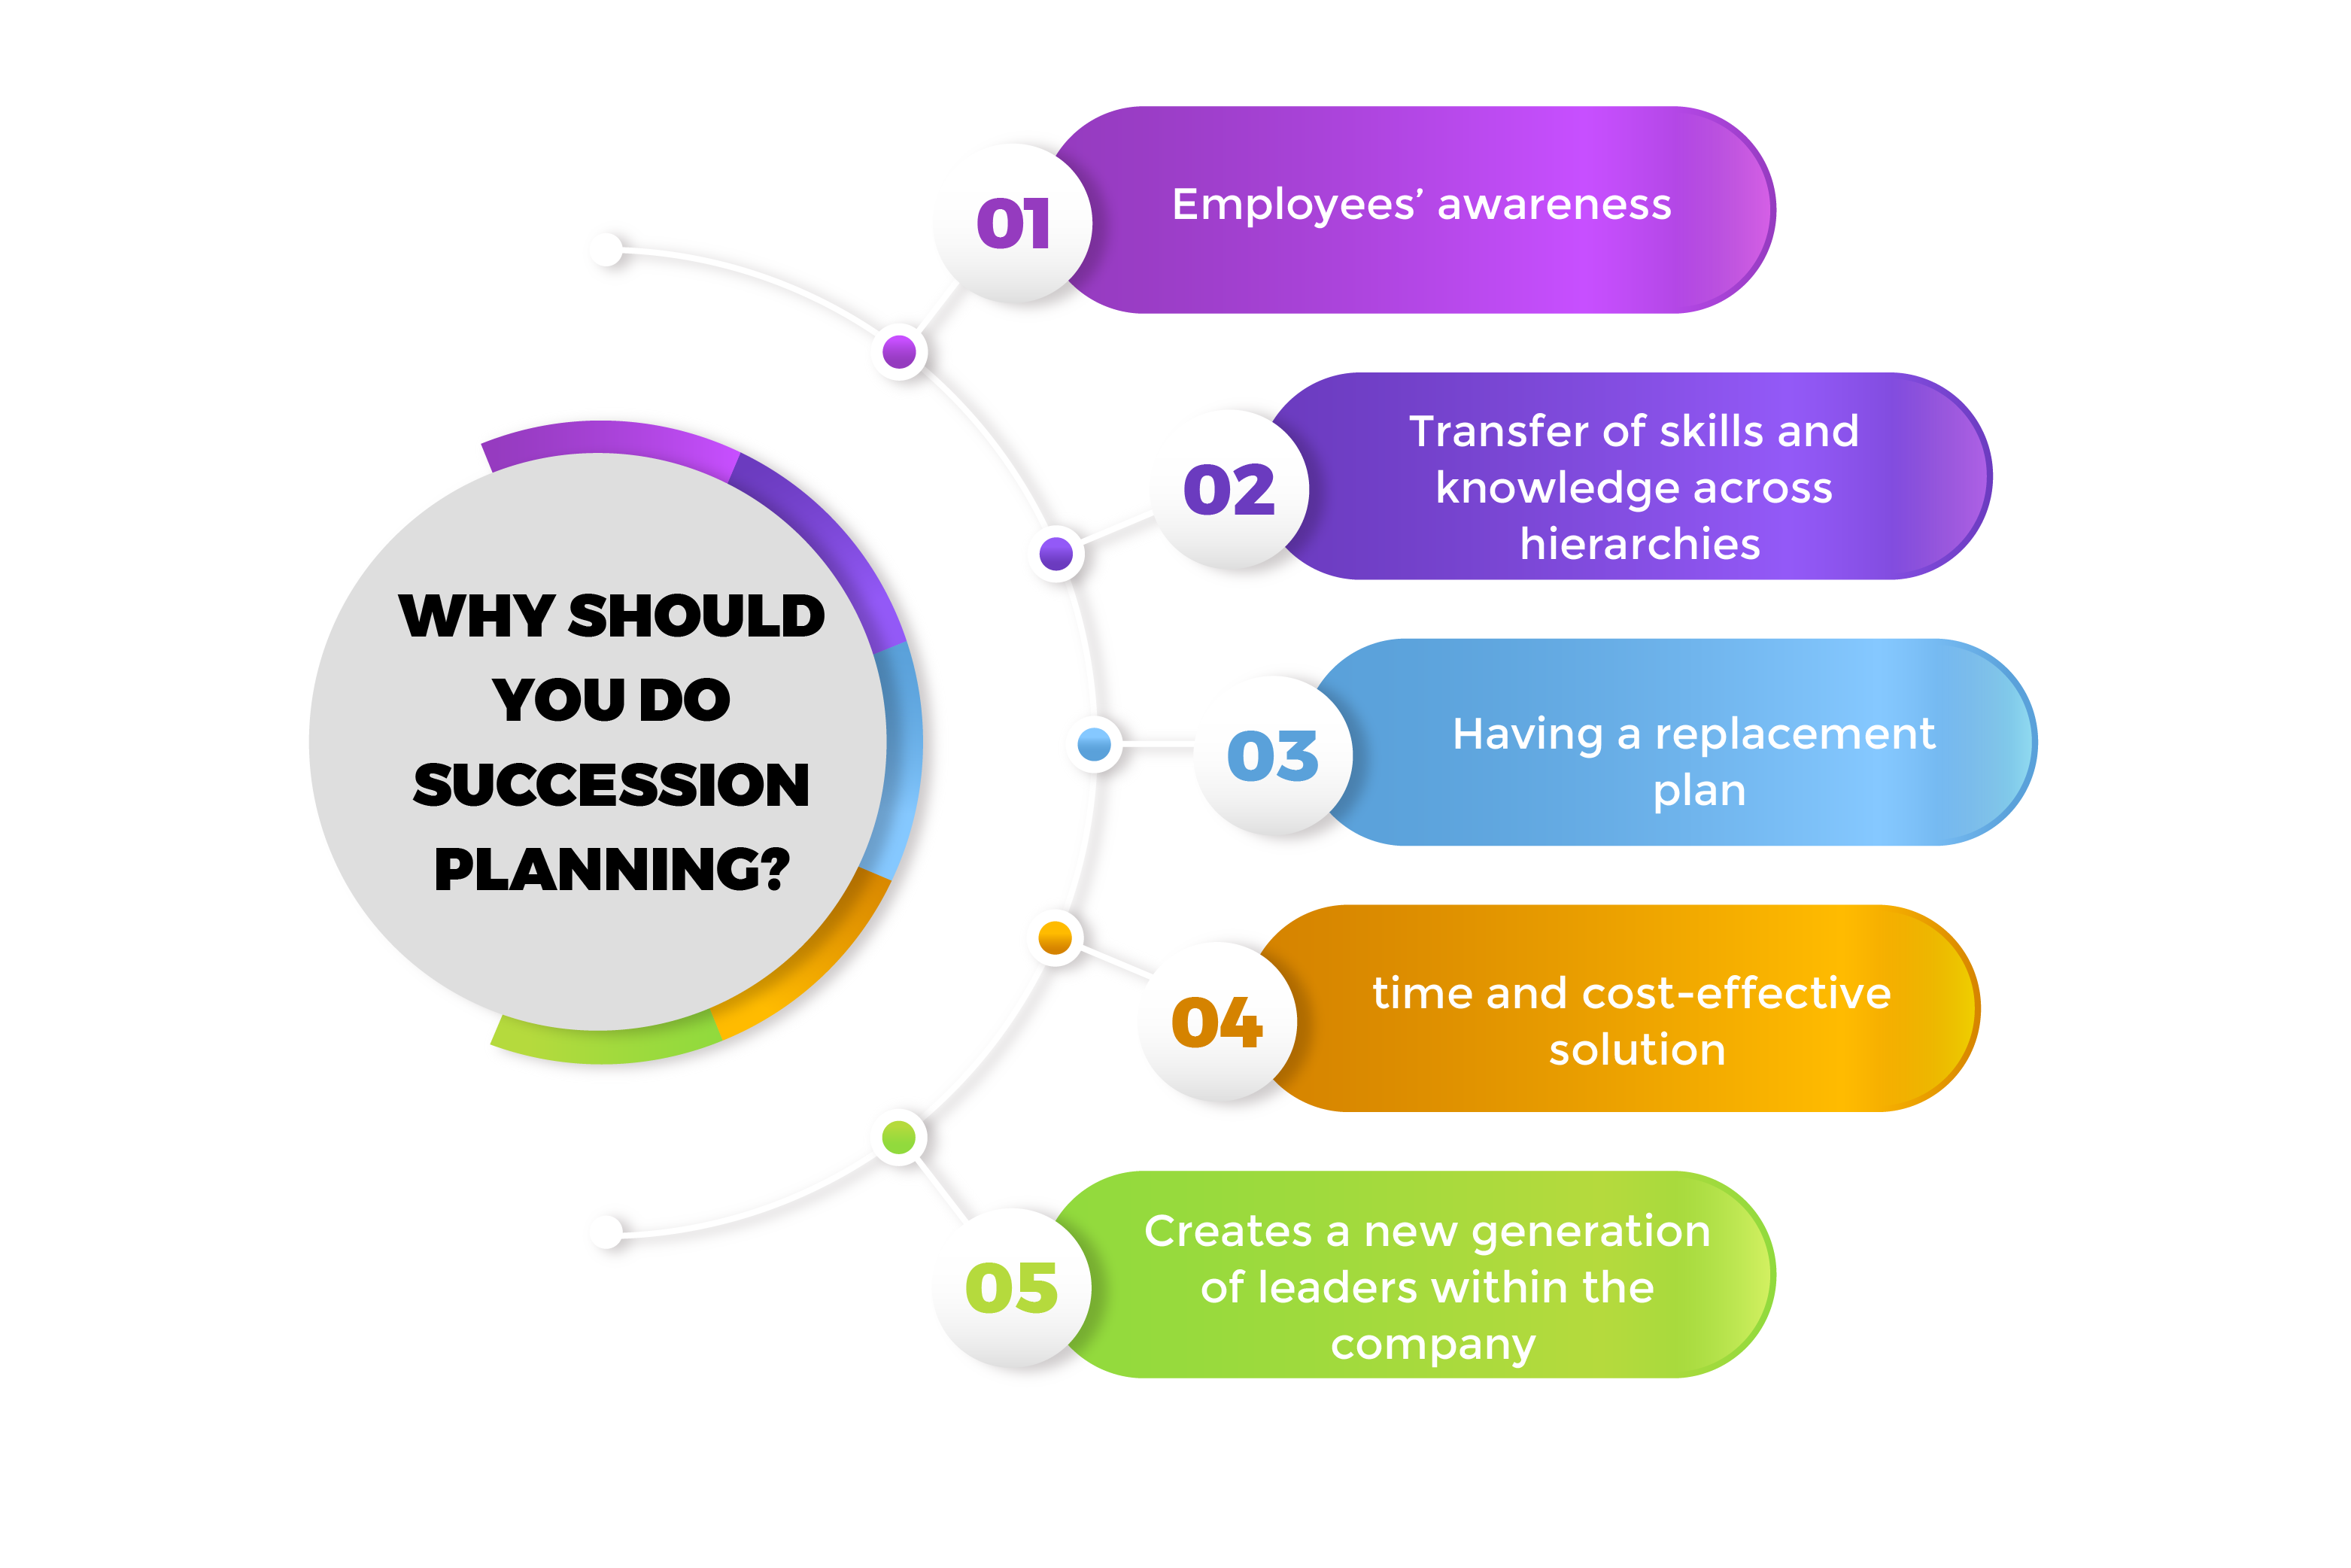 Why should you do succession planning?